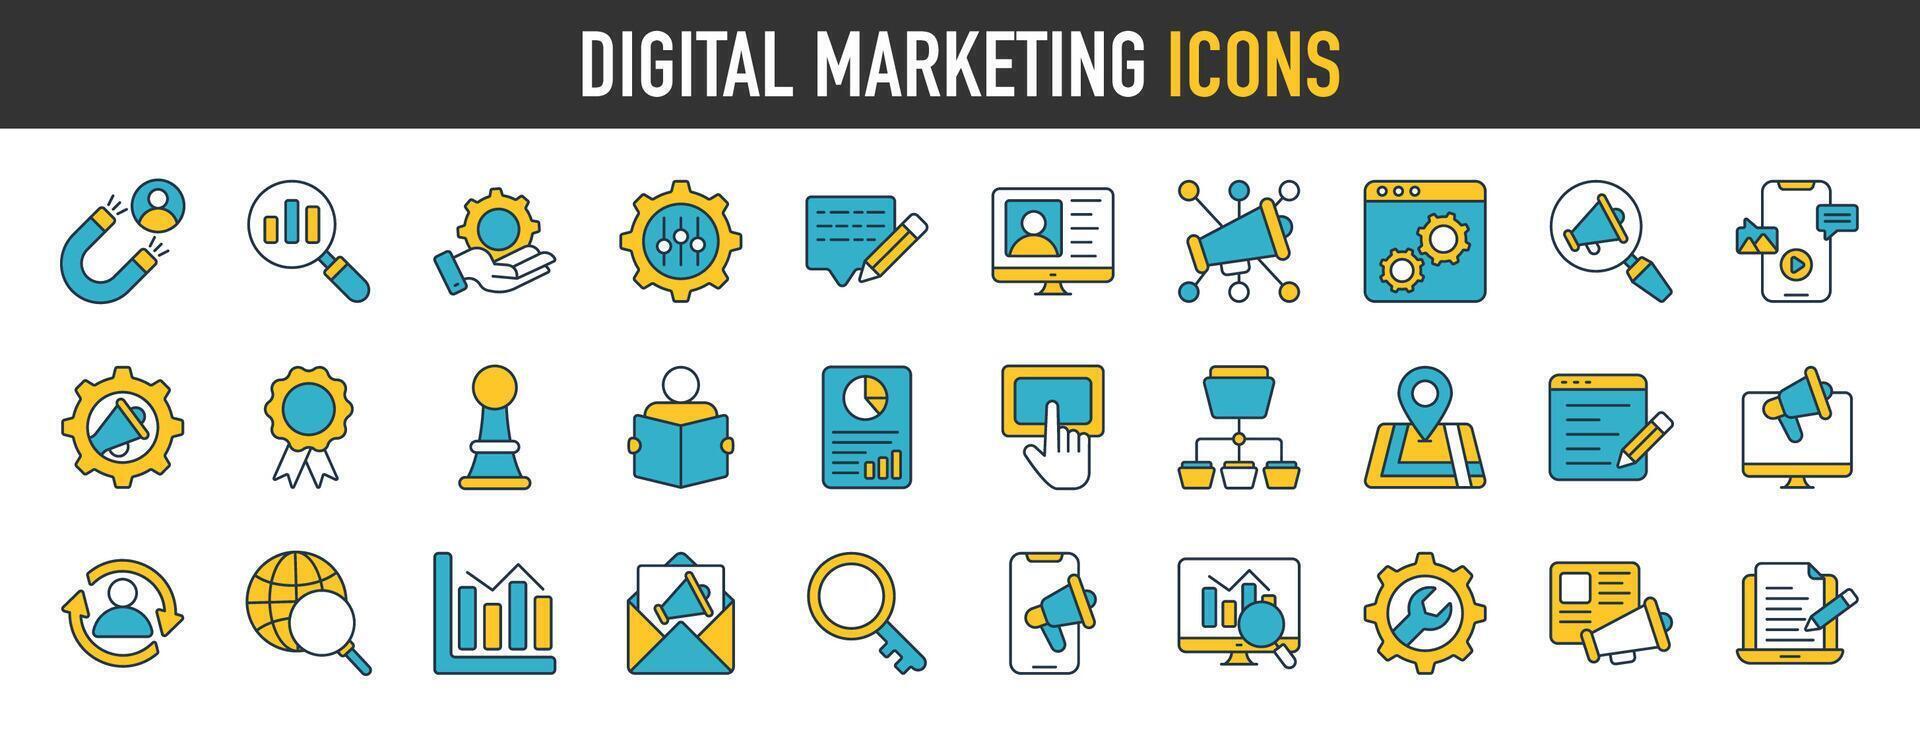 Digital marketing icon set. Containing seo, content, website, social media, ecommerce, electronic devices, internet, analysis, sales and online advertising. vector icons collection.